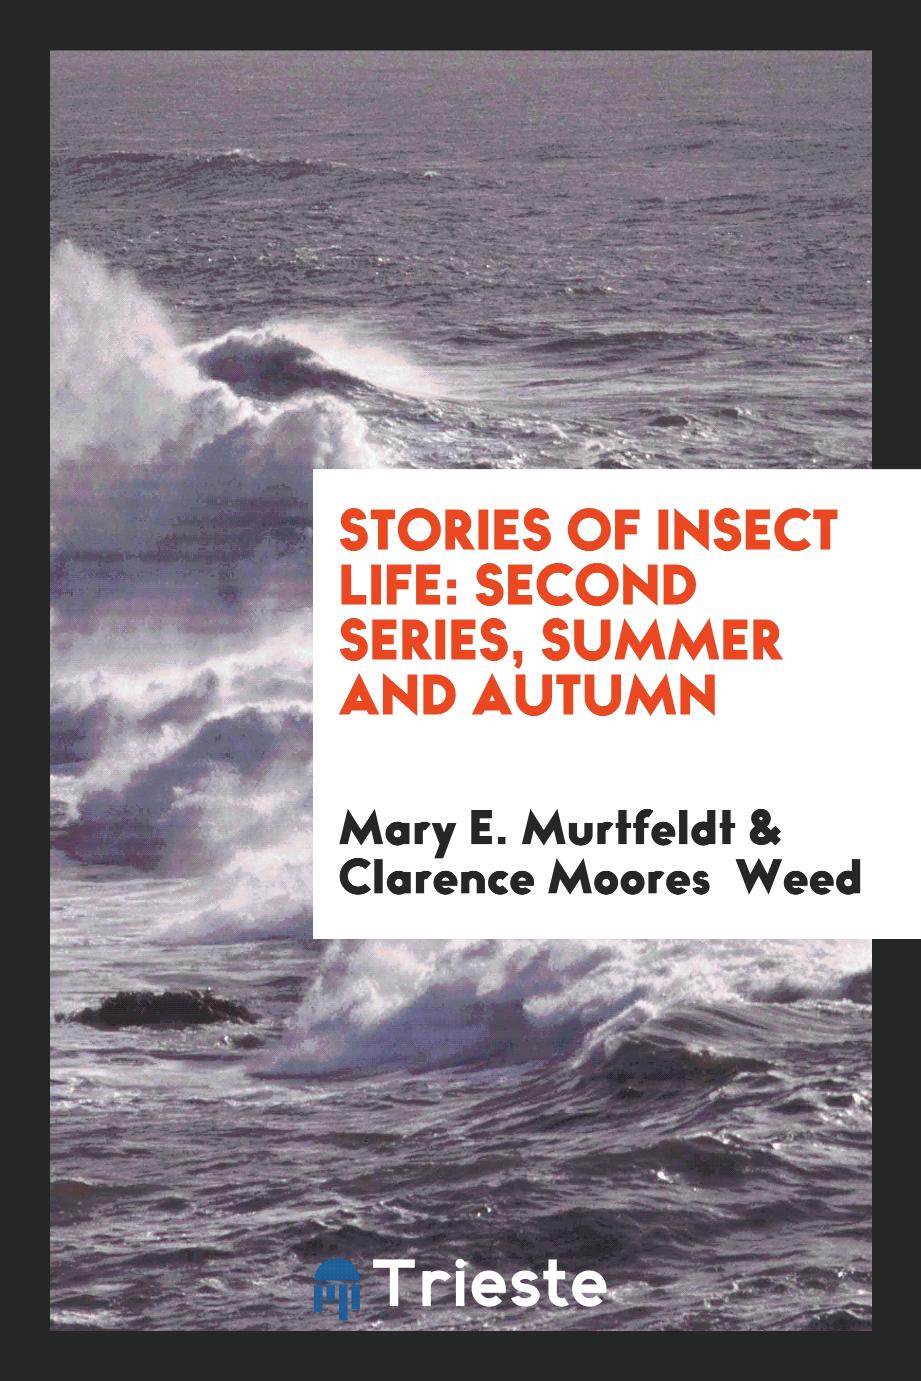 Stories of Insect Life: Second Series, Summer and Autumn